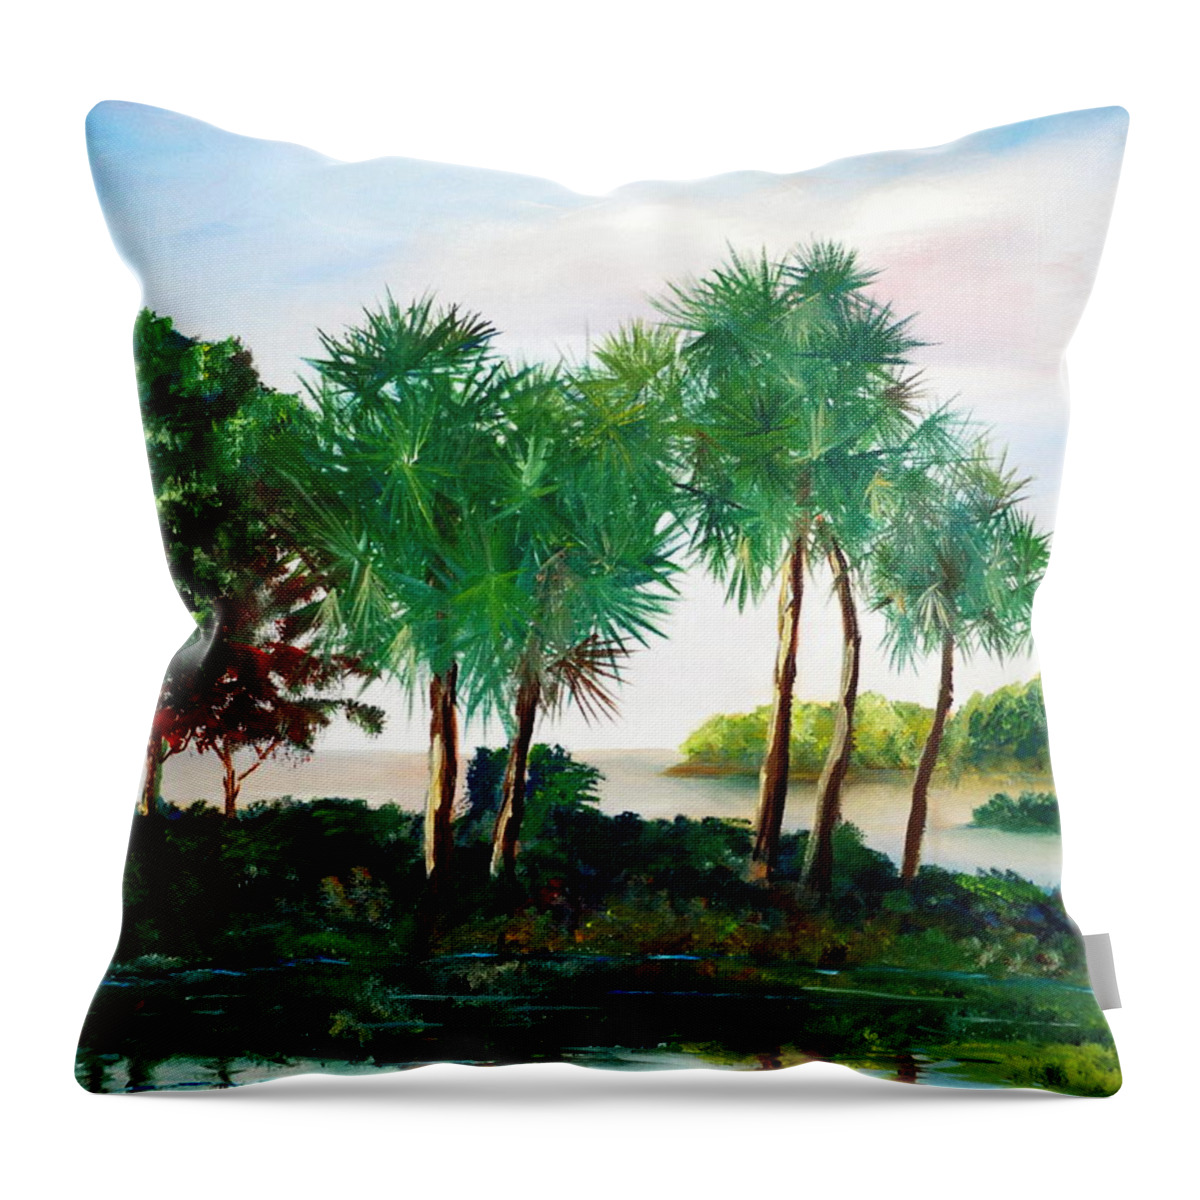 Palms Throw Pillow featuring the painting Isle of Palms by Phil Burton